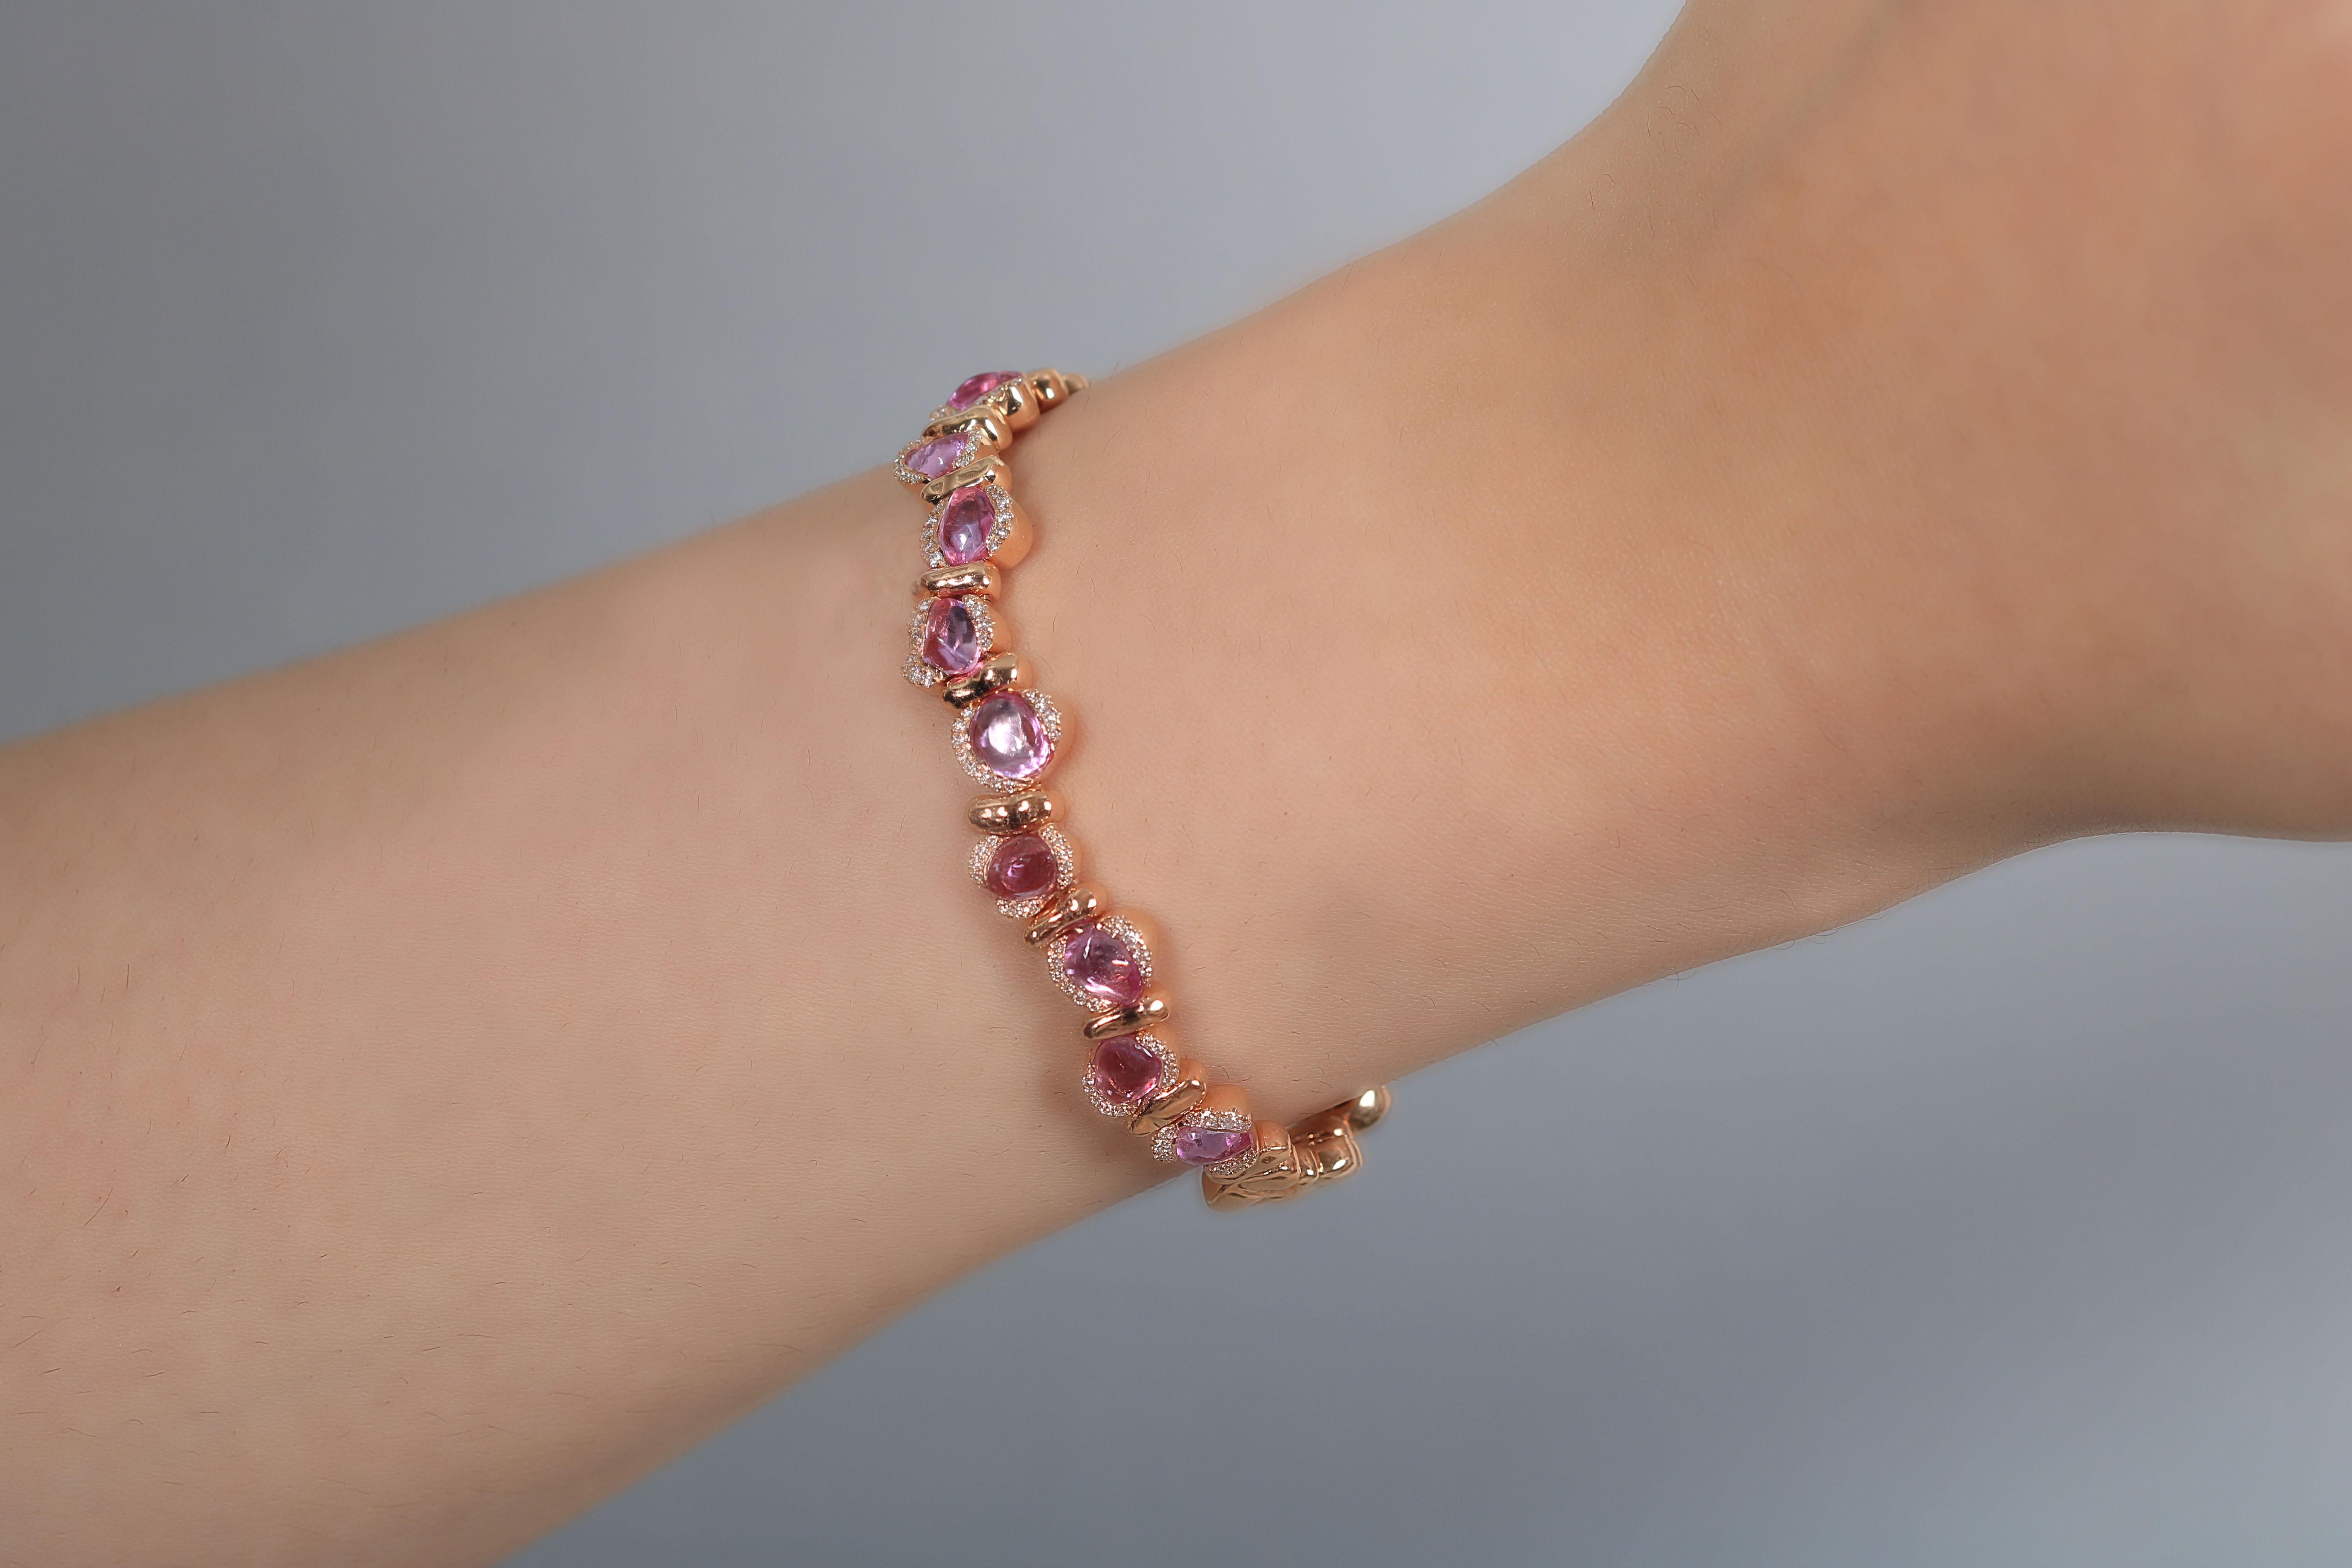 A perfect rose gold bracelet designed to be worn everyday. With dainty little sapphires surrounded with white pave diamonds and organic lines. You can stack it with other bracelets or with your favorite watch.

-Diamond Clarity: VS / G H COLOR 